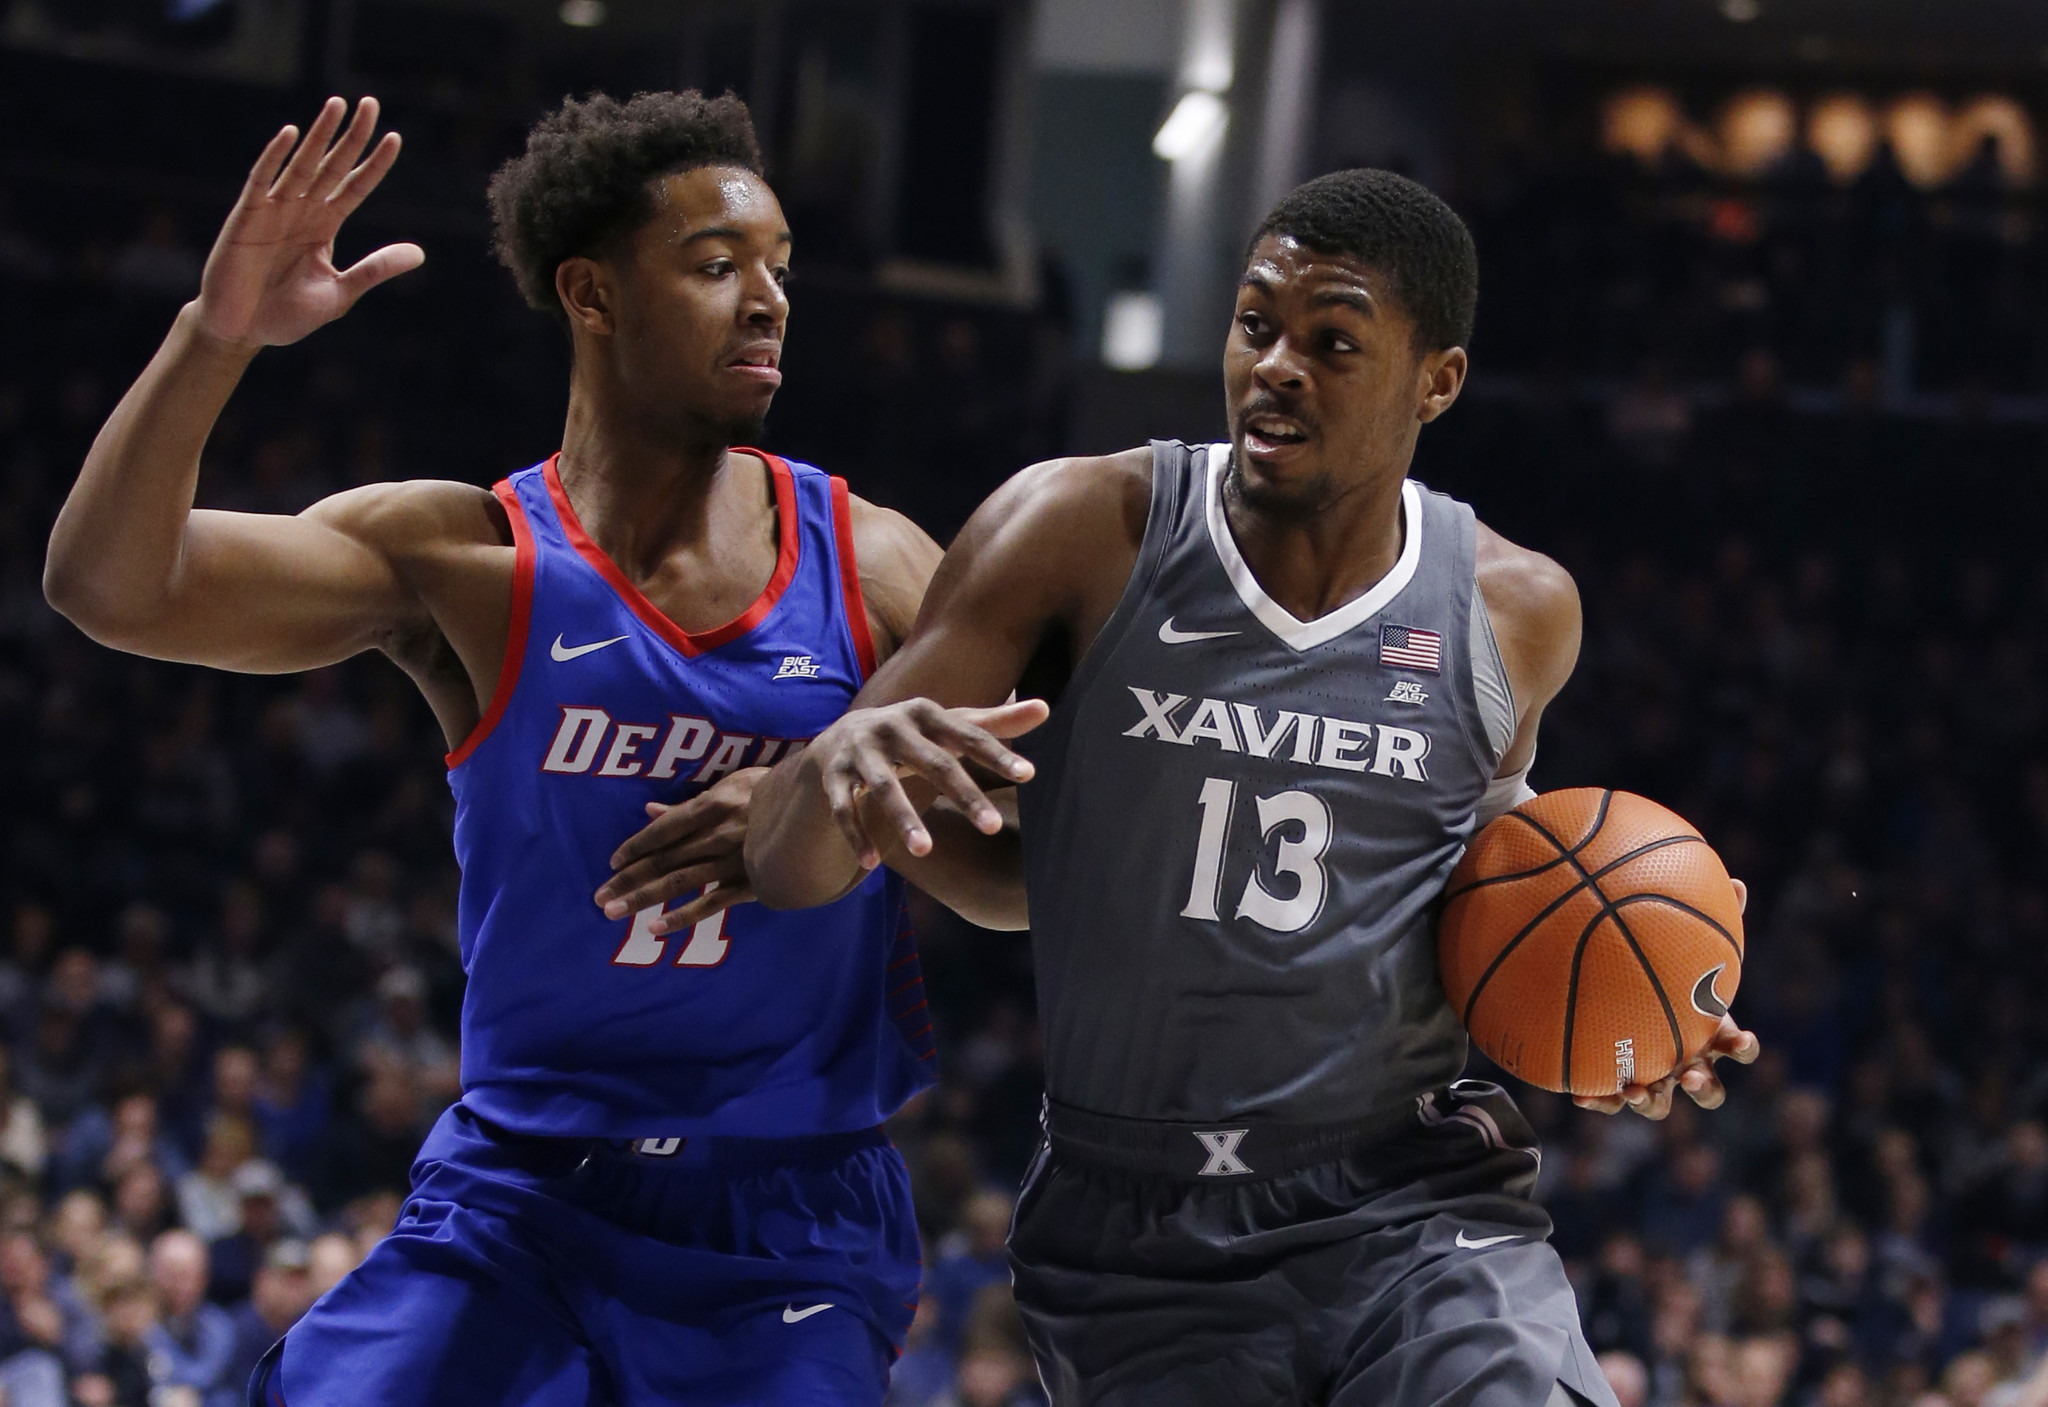 DePaul loses 16-point second-half lead, falls to No. 6 Xavier 77-72